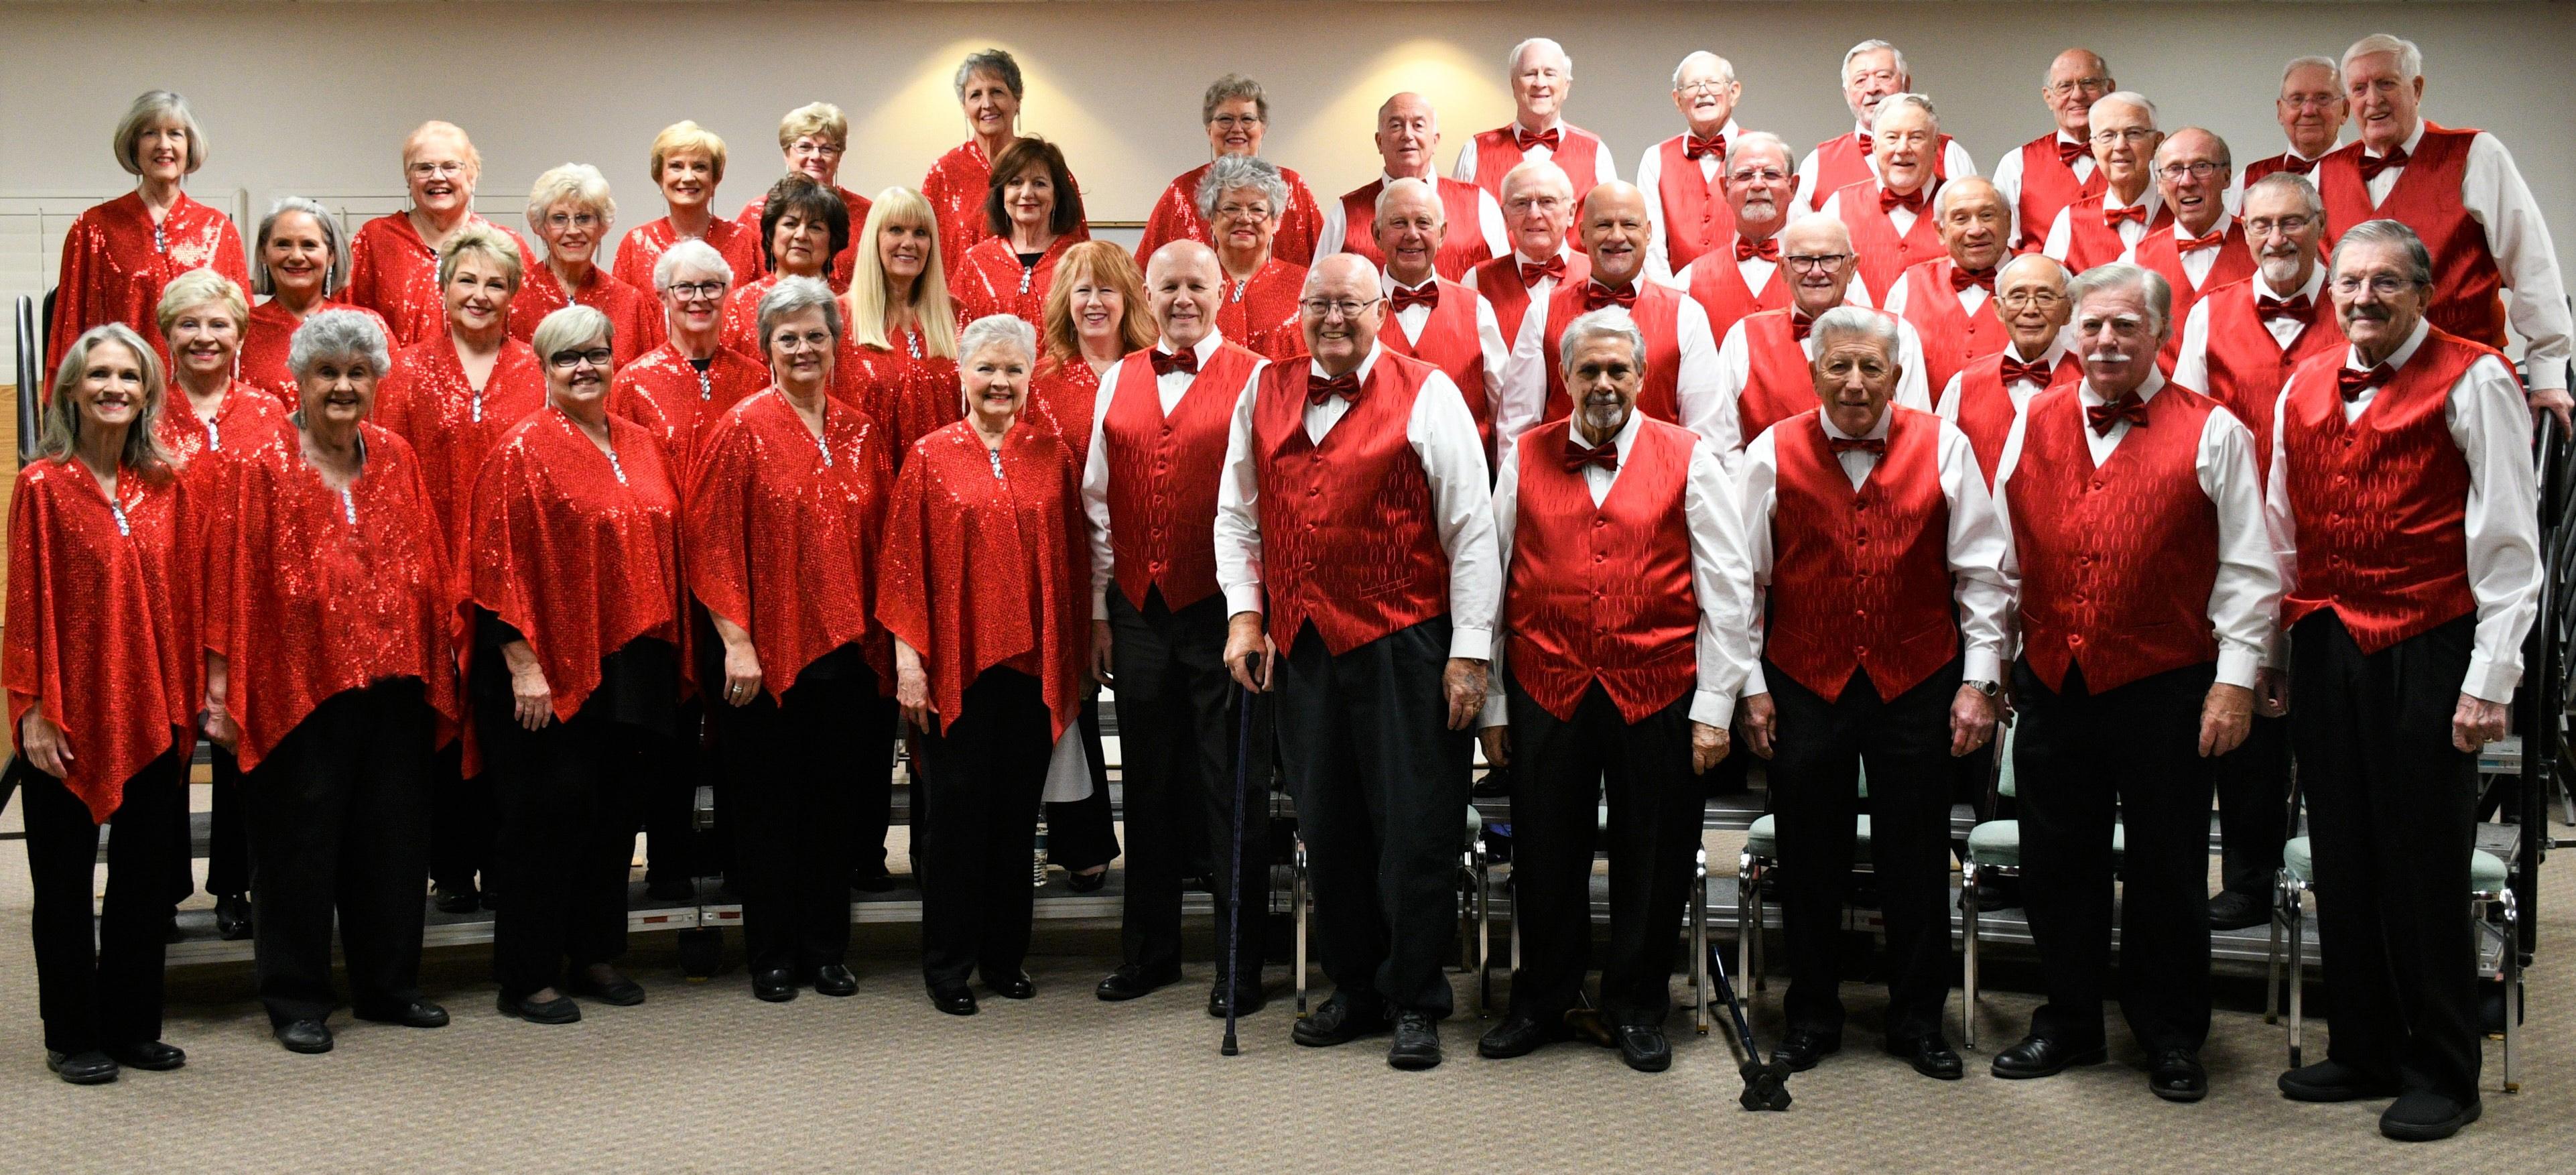 A Cappella Christmas Concert featuring two choruses Sunday December 18 was a success